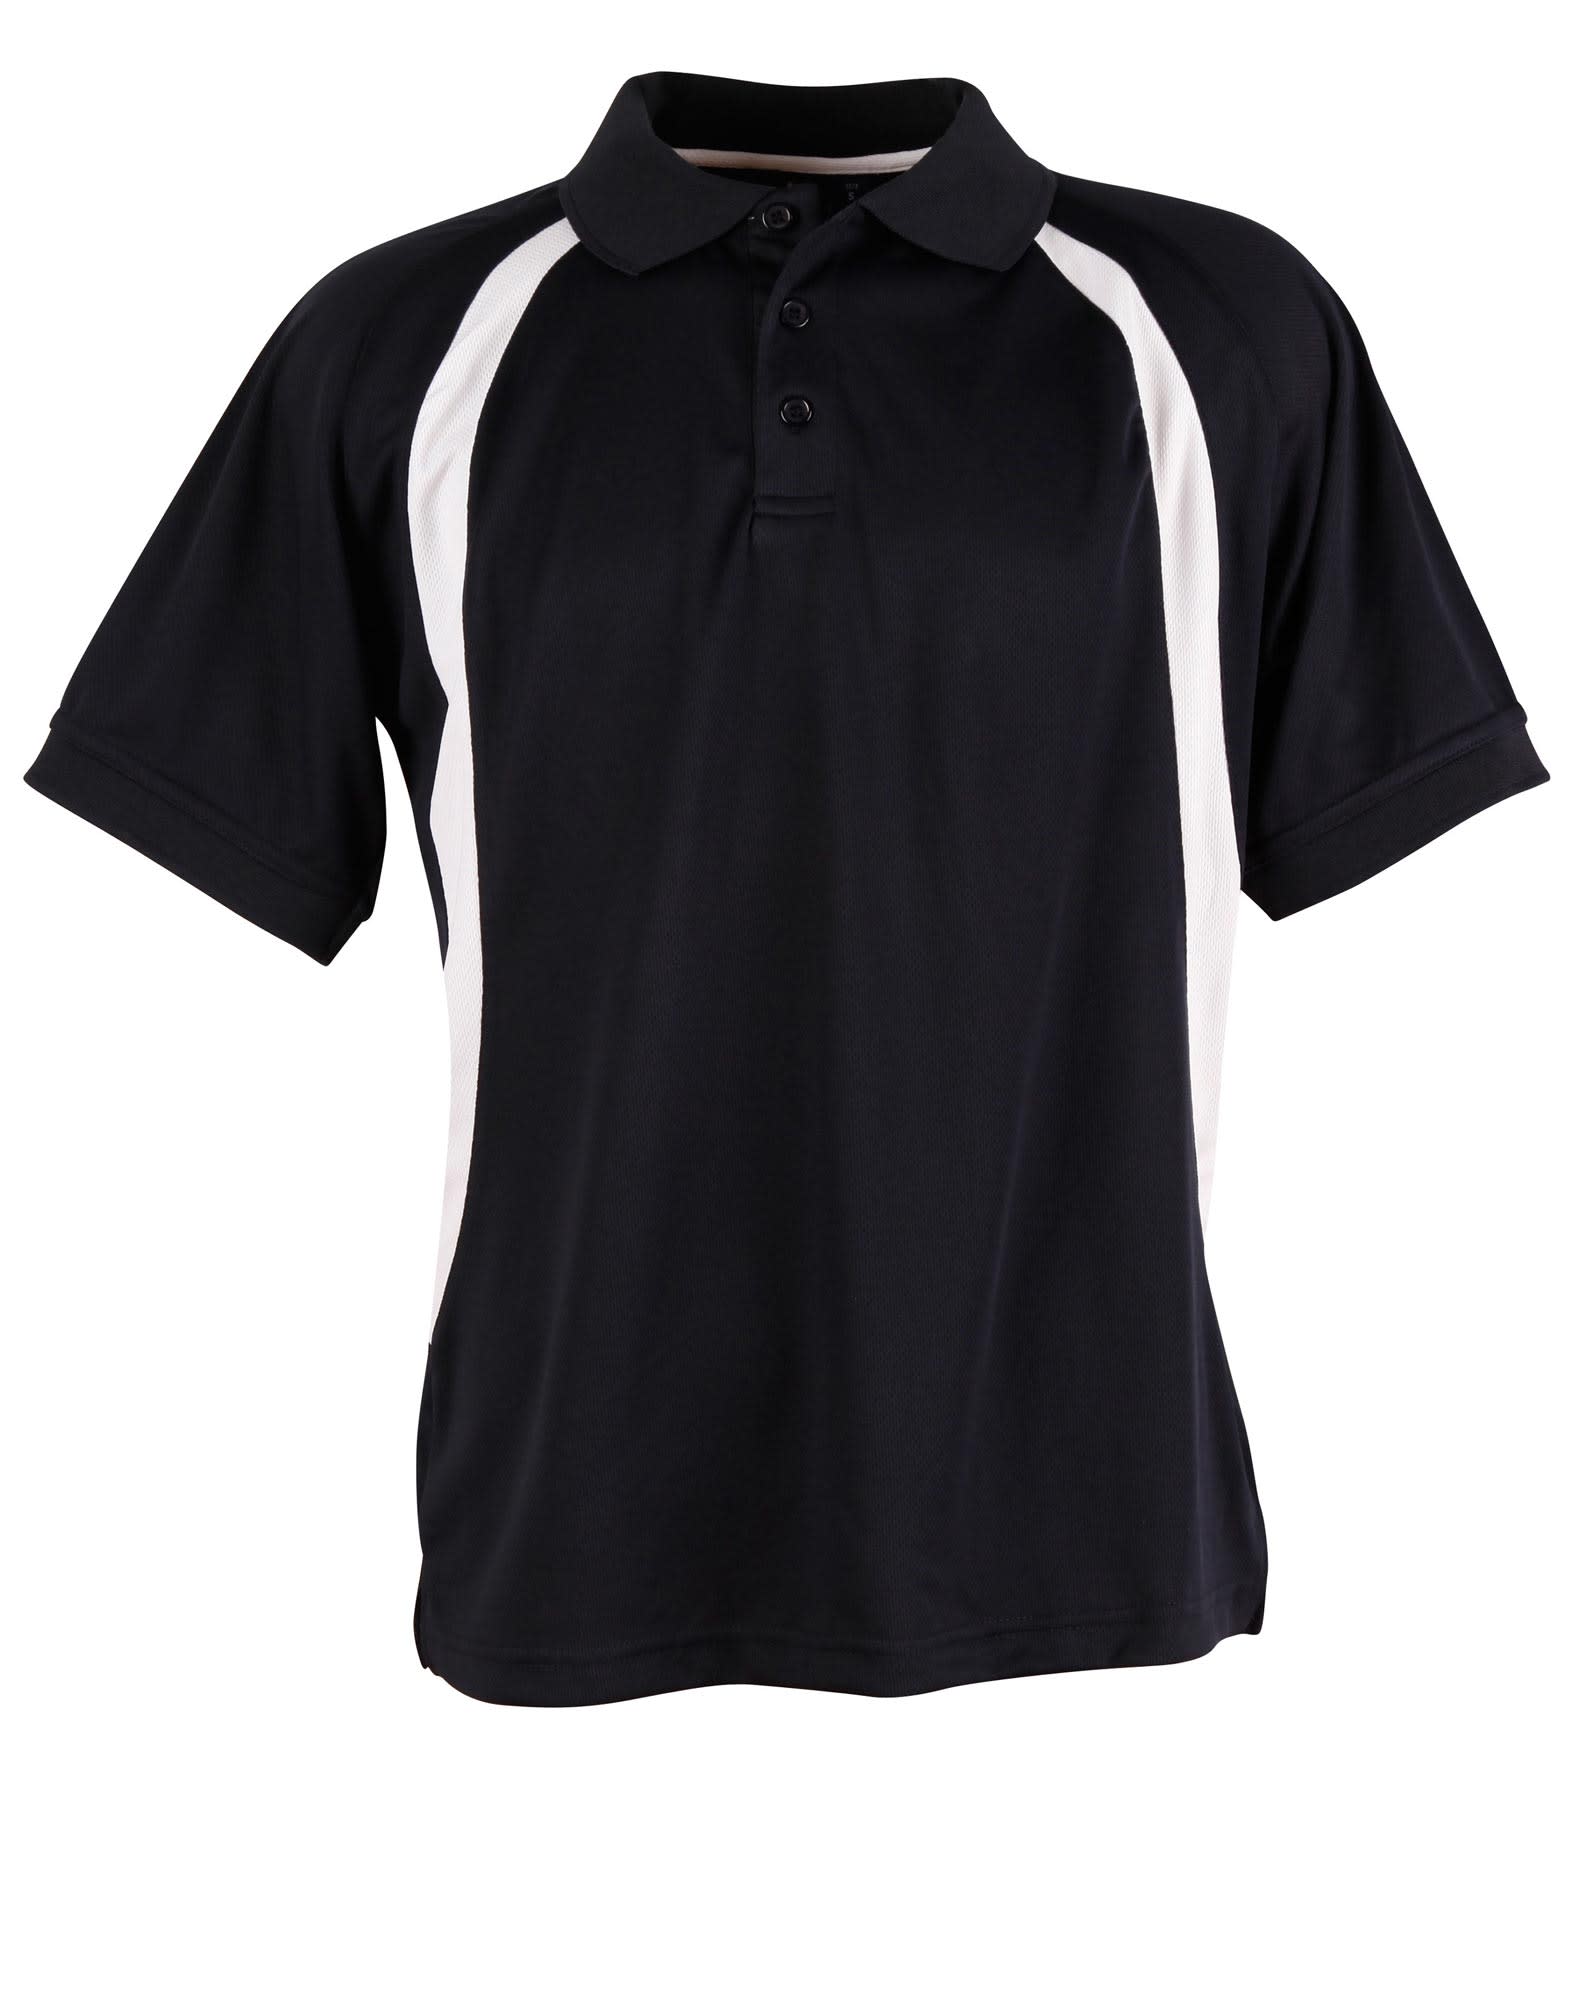 Mens CoolDry Mesh Contrast Short Sleeve Polo PS51 | Navy/White